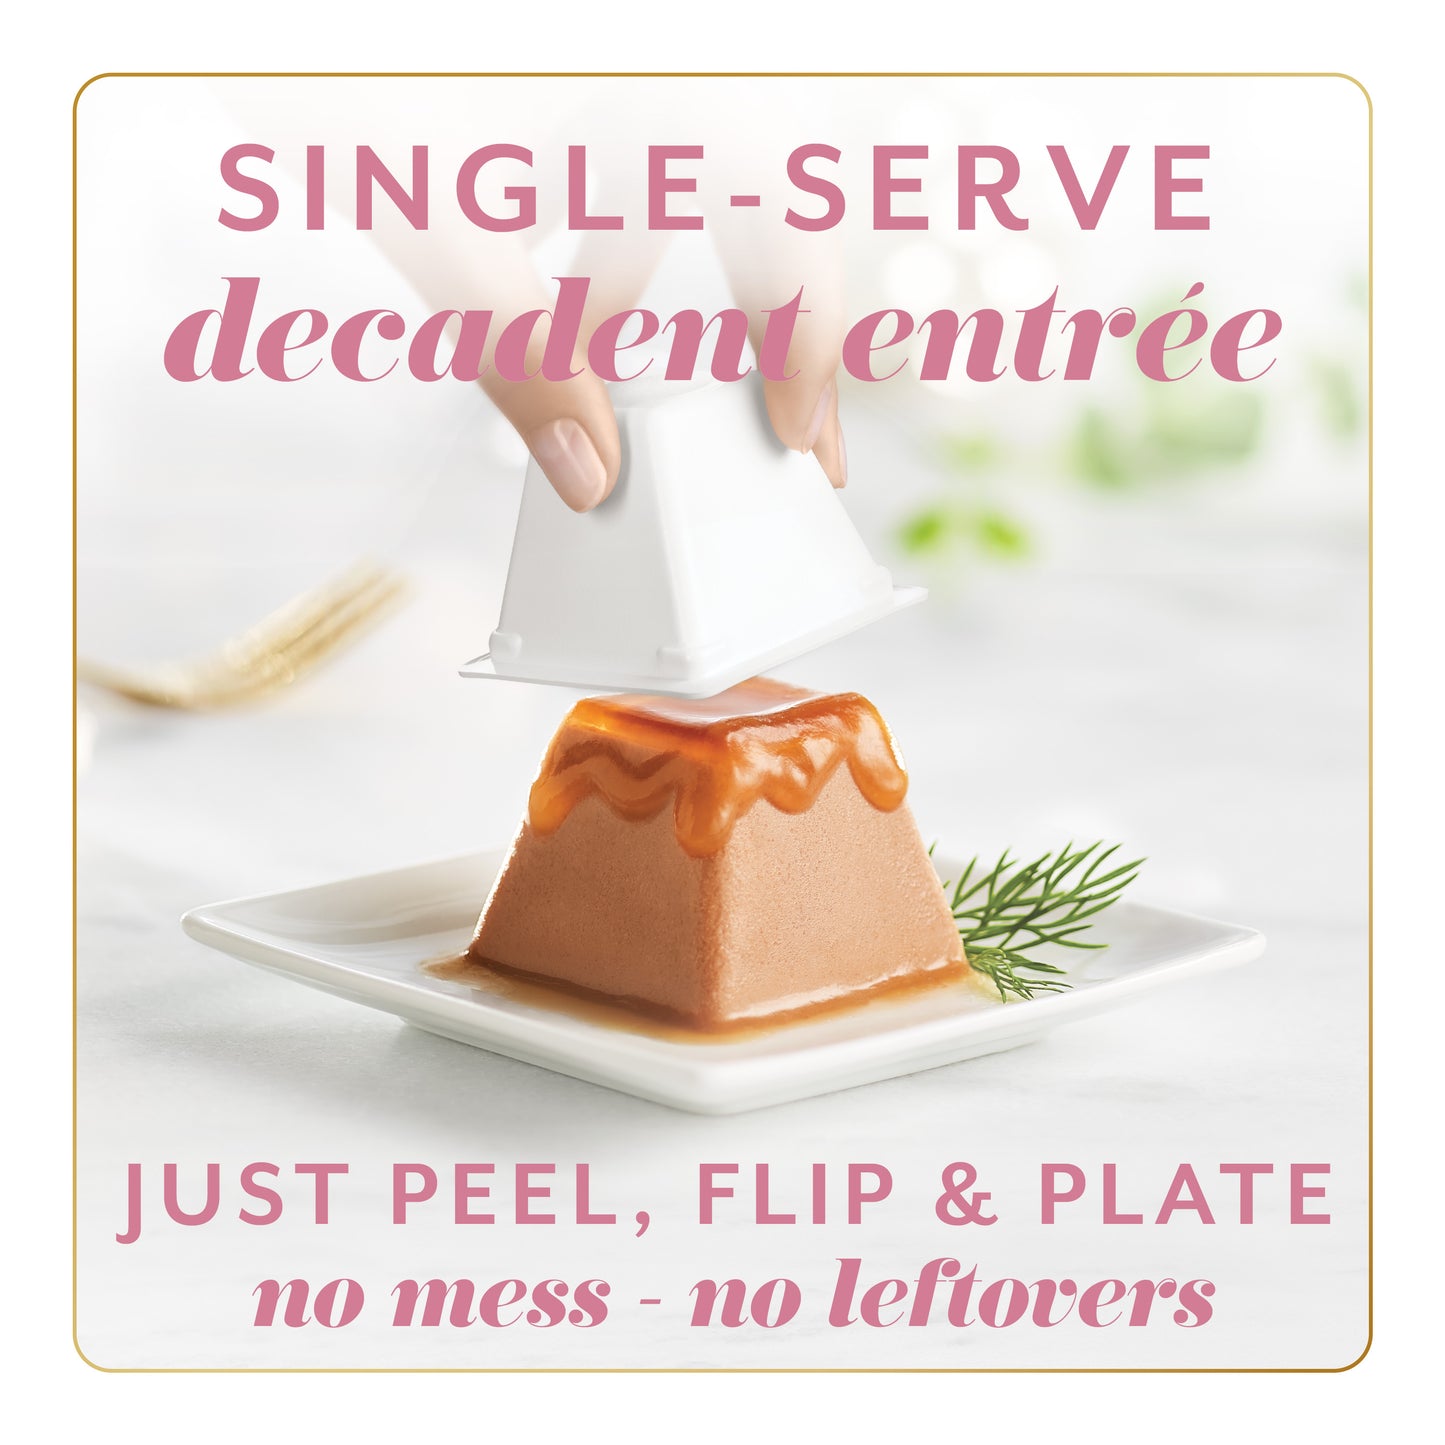 Single serve plated Gem with garnish - just peel, flip and plate for no mess, no leftovers